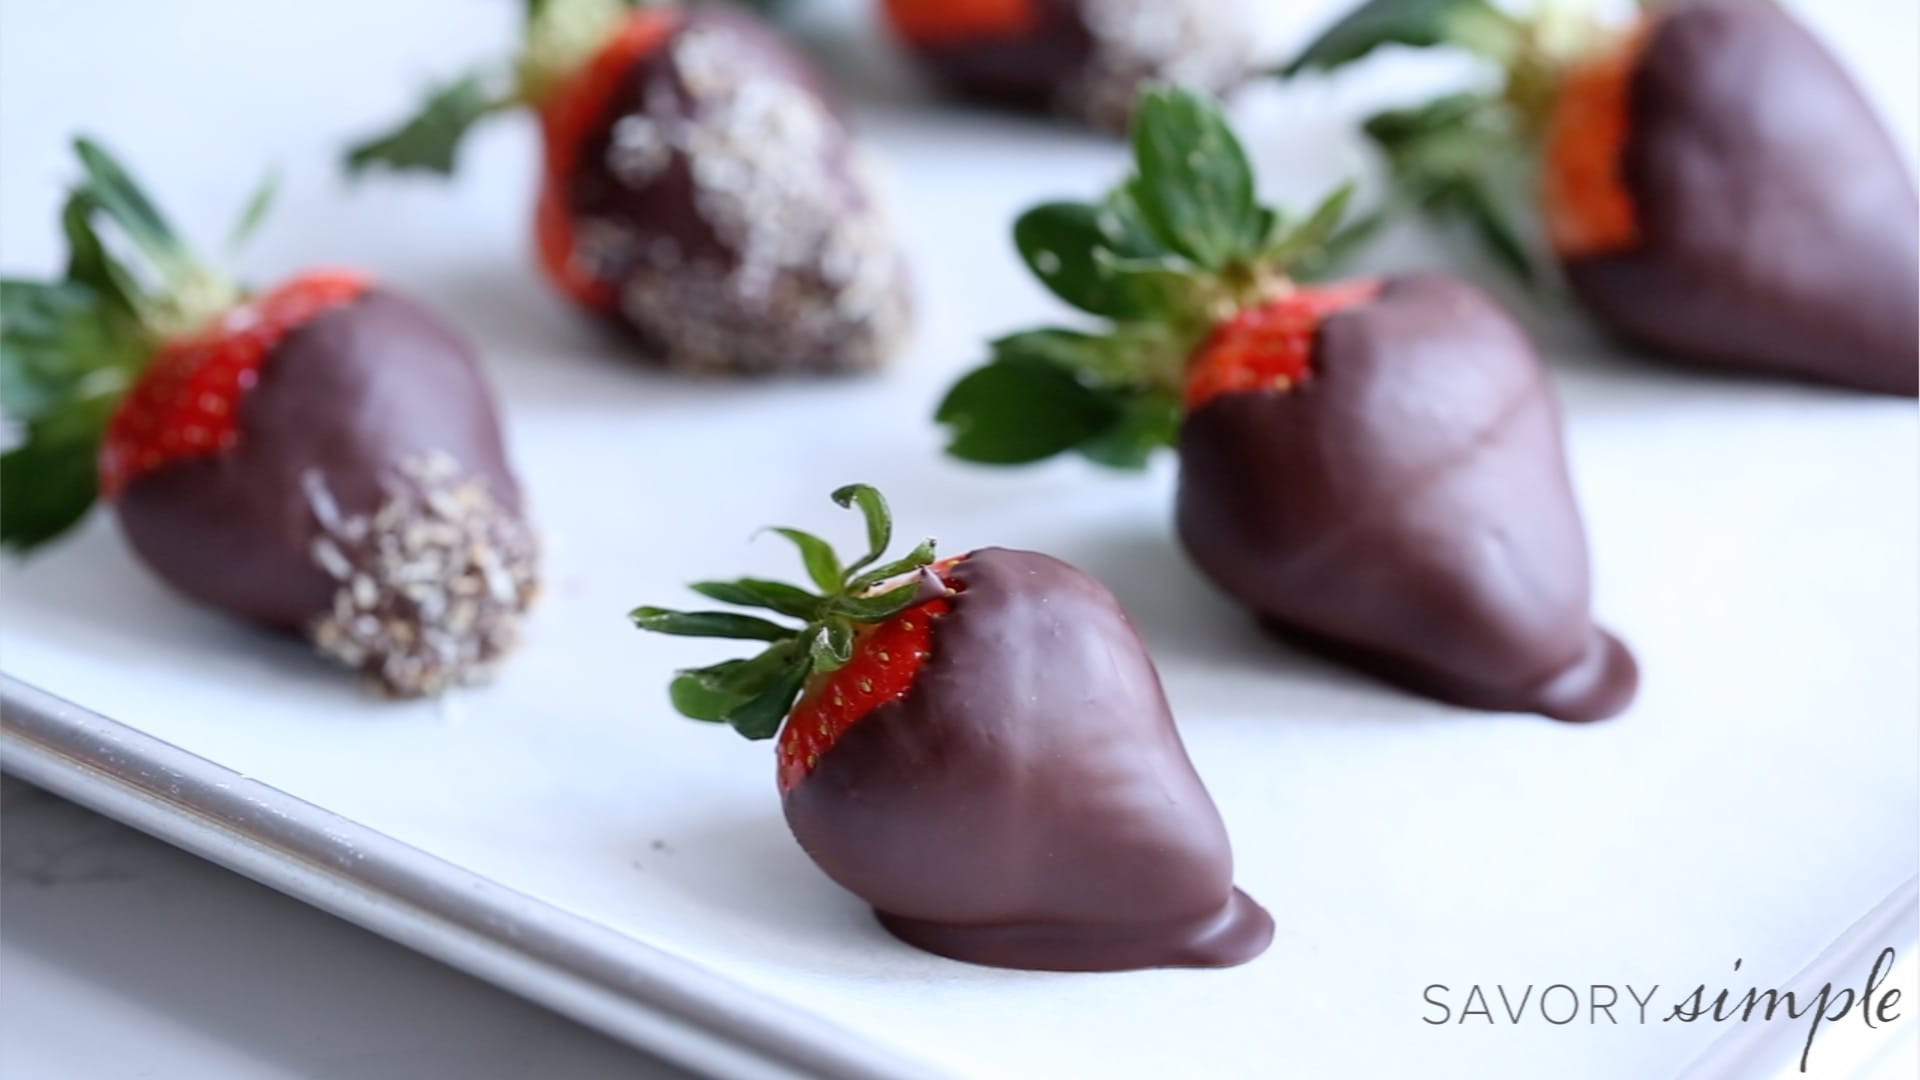 Chocolate Covered Strawberries - Shweta in the Kitchen